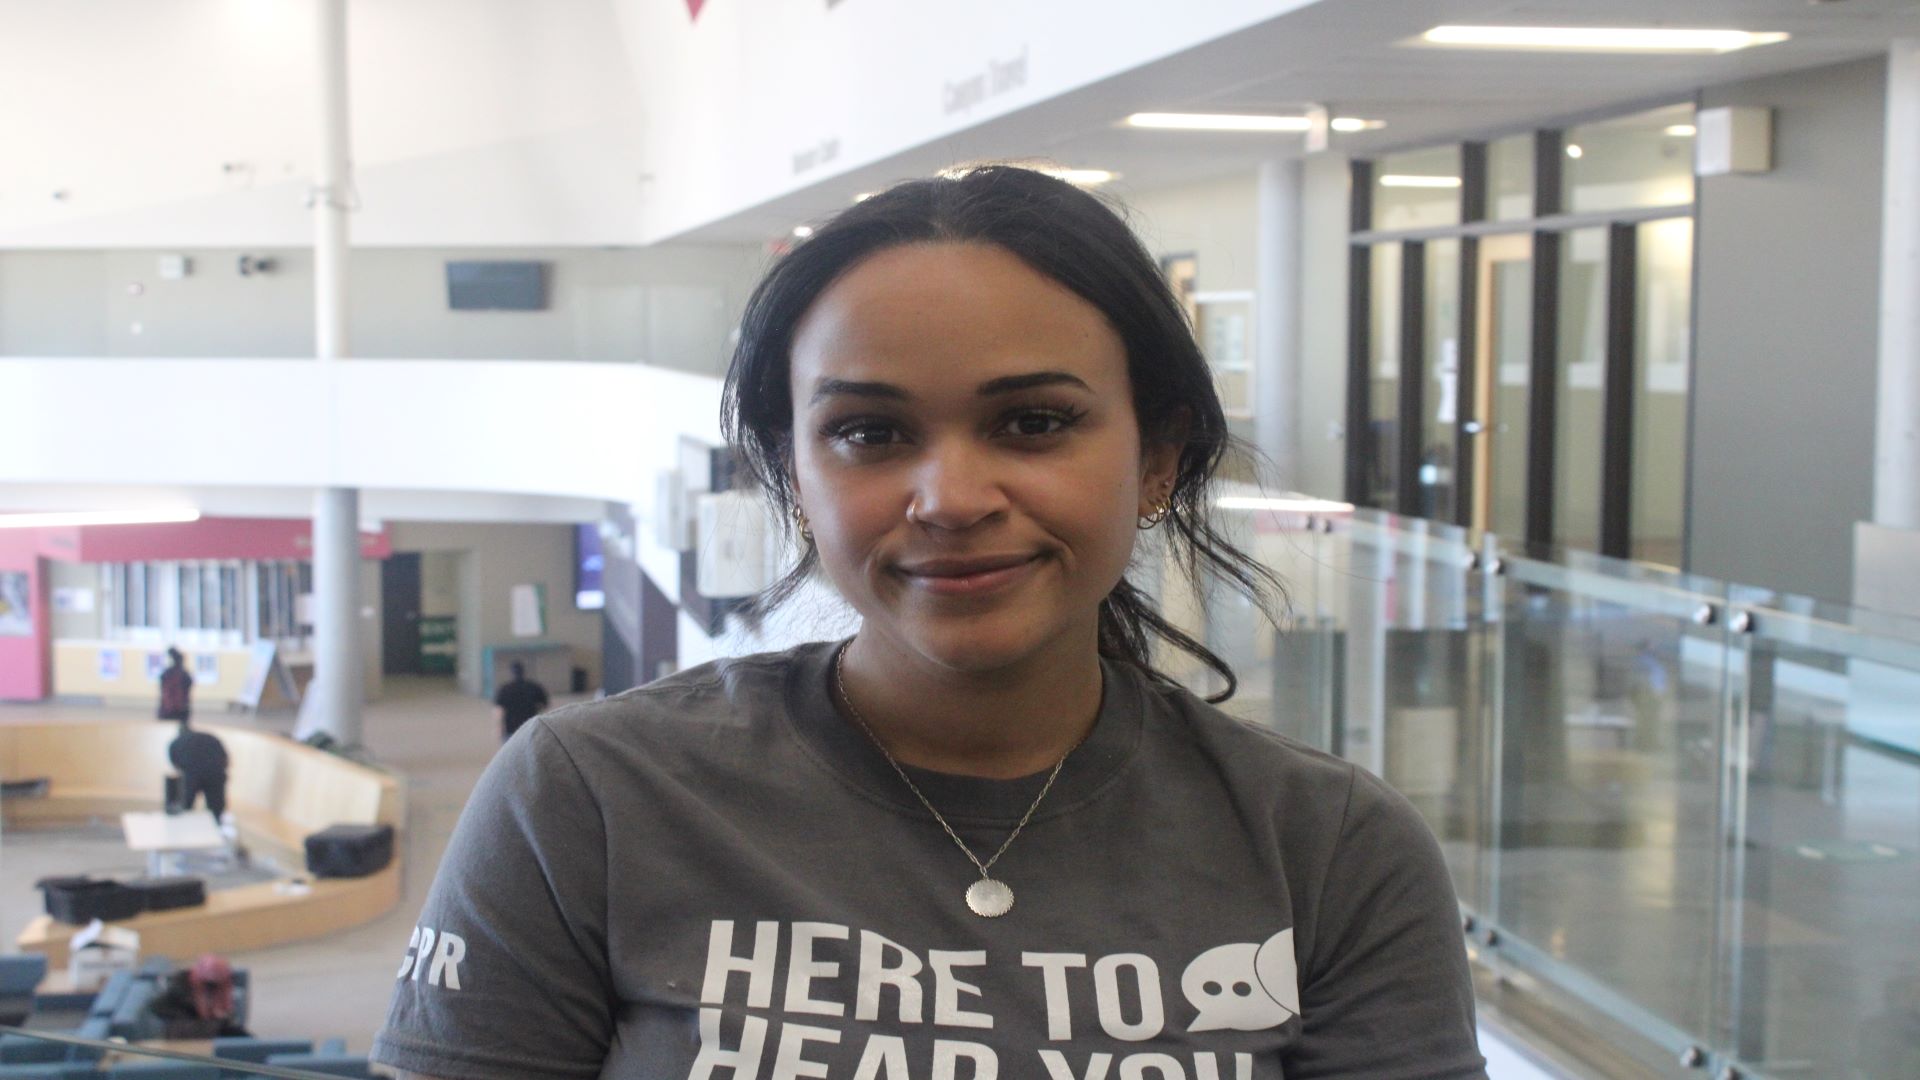 Tejah-Mae Davis, a public relations student and team lead, is fundraising with her classmates on behalf of the Sexual Assault Support Center of Ottawa.